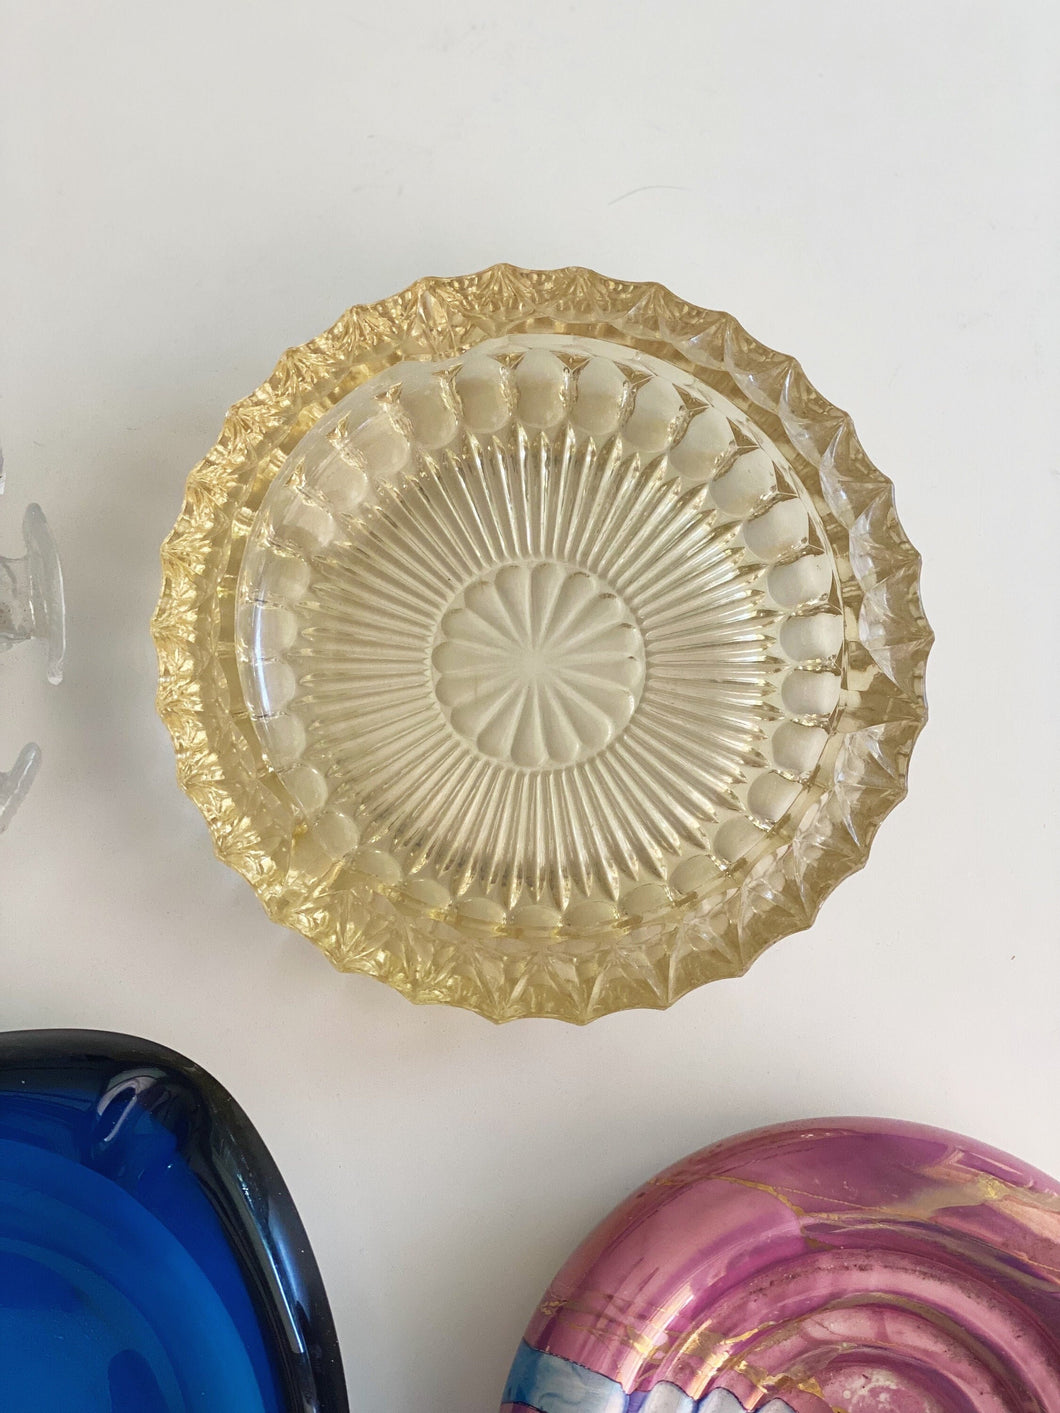 Vintage Pressed Carnival Glass Round Candy Dish / Catch All Tray / Ashtray